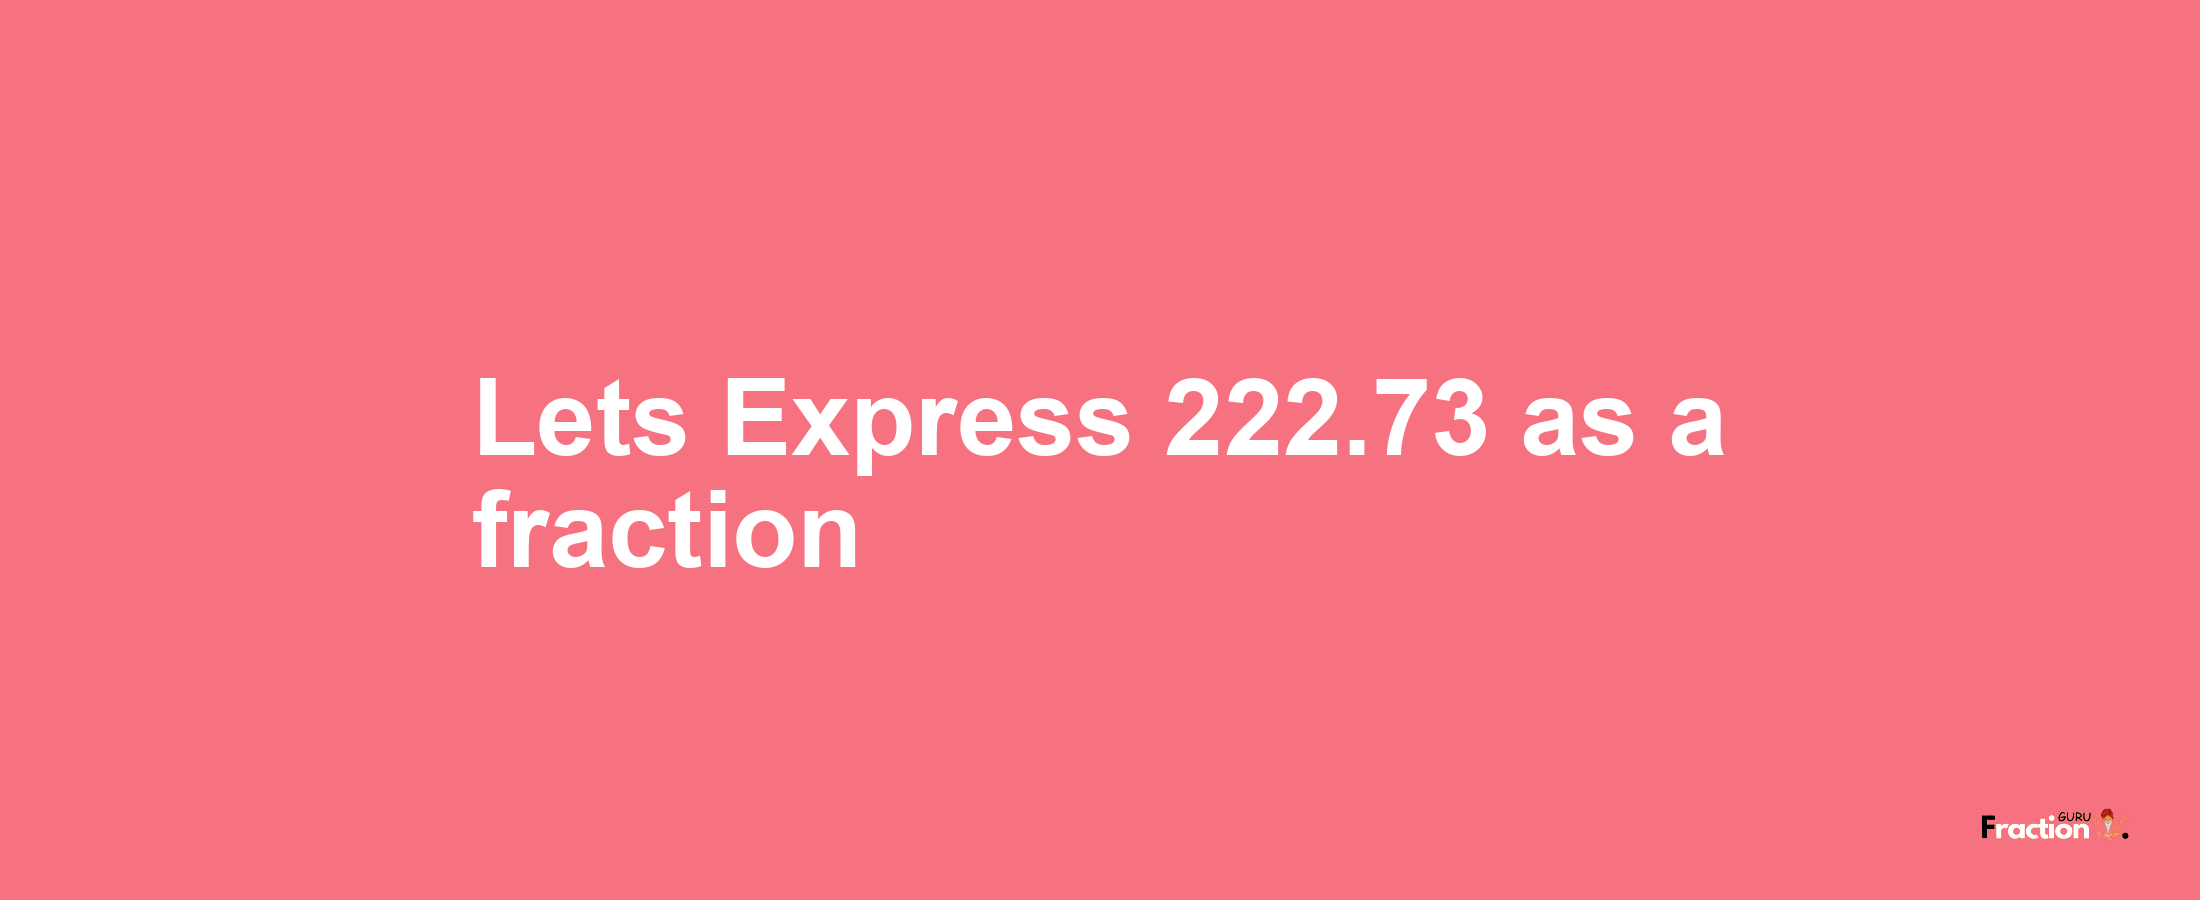 Lets Express 222.73 as afraction